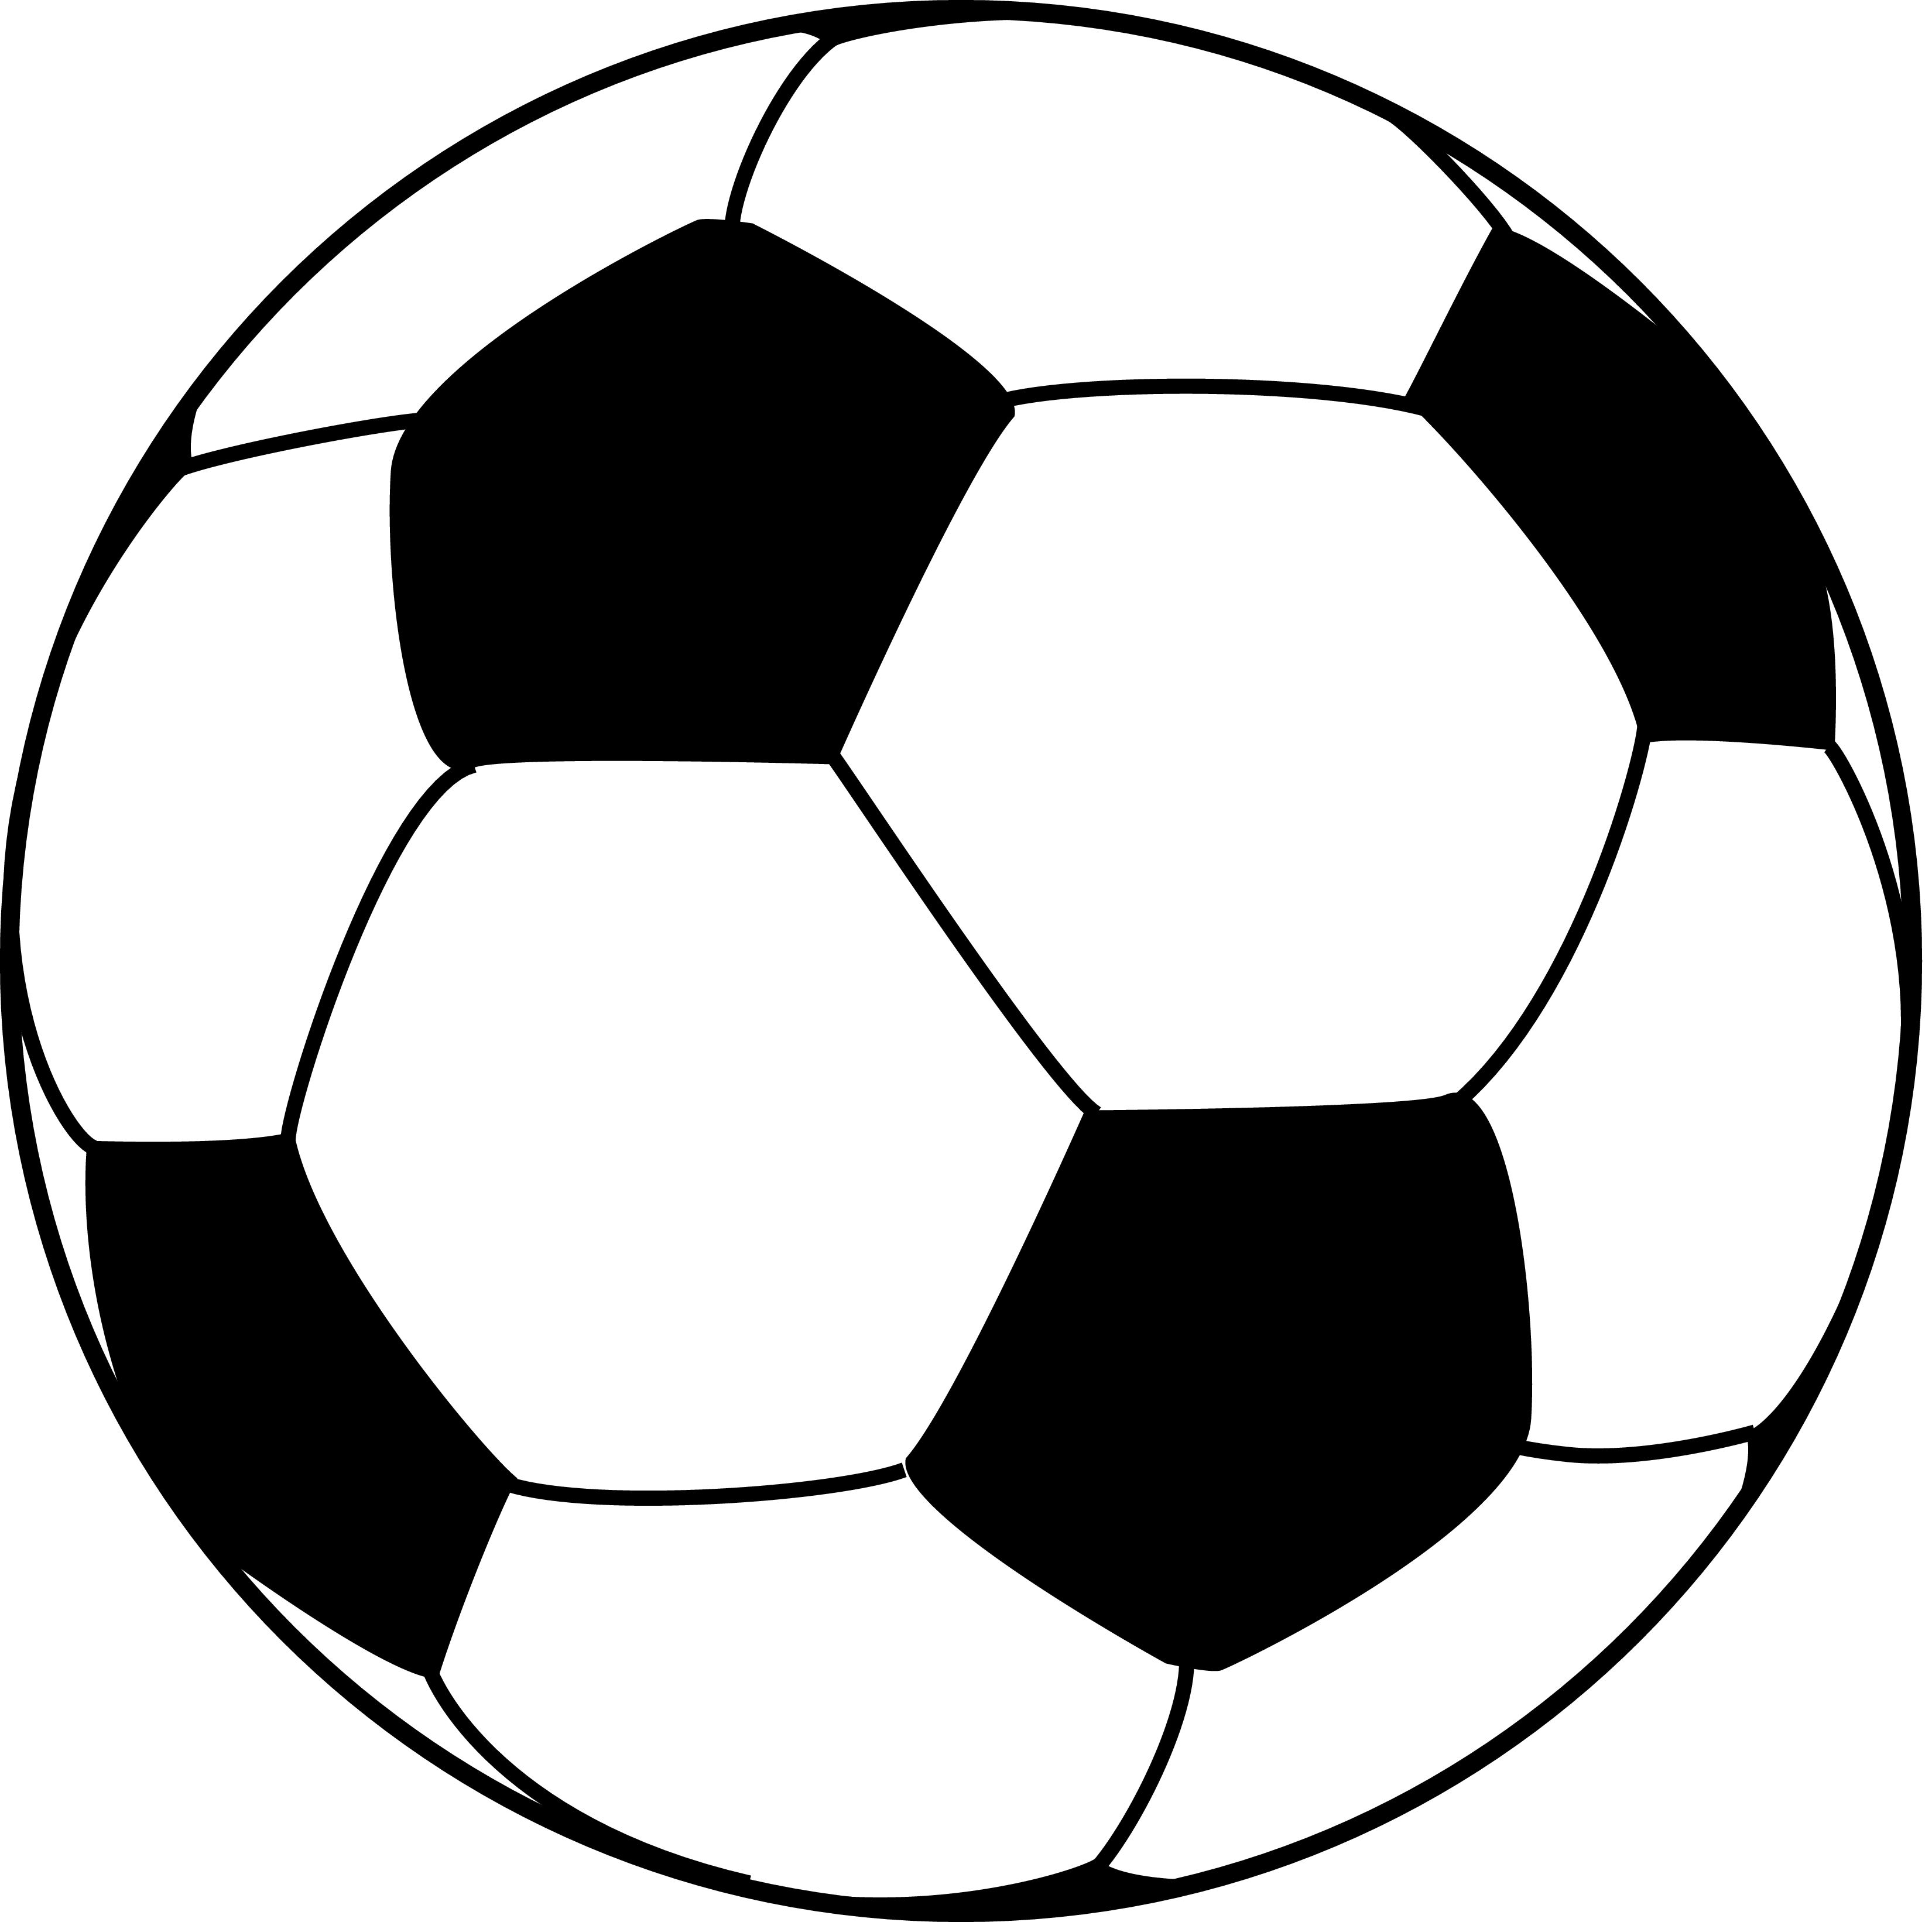 Image Of A Soccer Ball